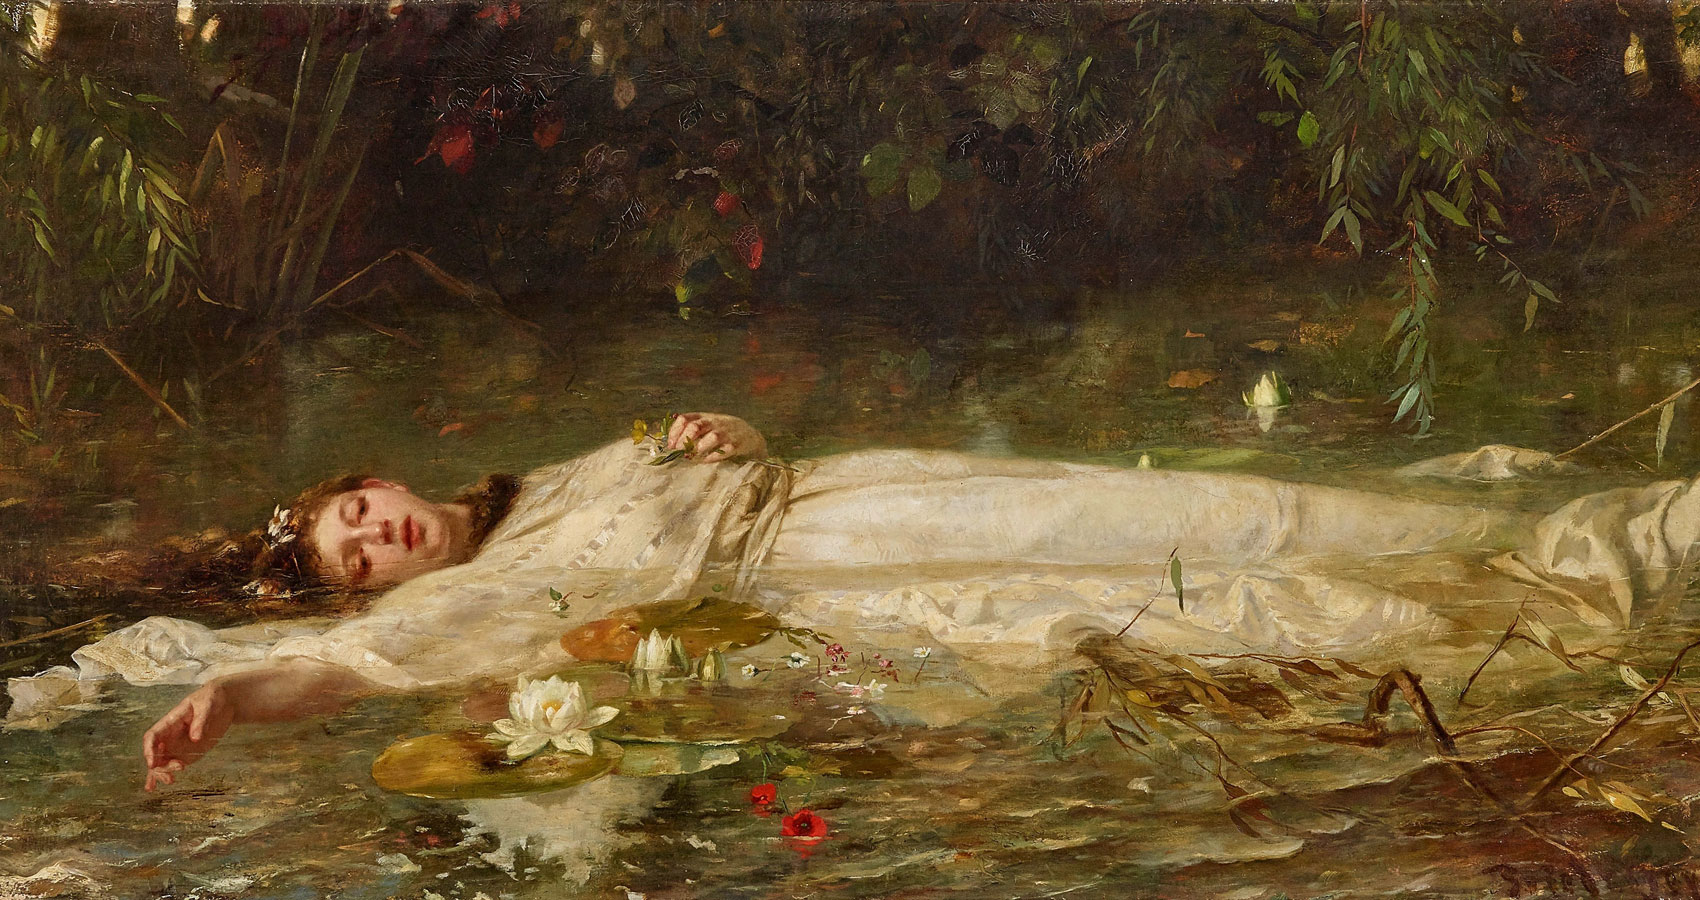 Poem for Ophelia, micropoetry by Martina Rimbaldo at Spillwords.com